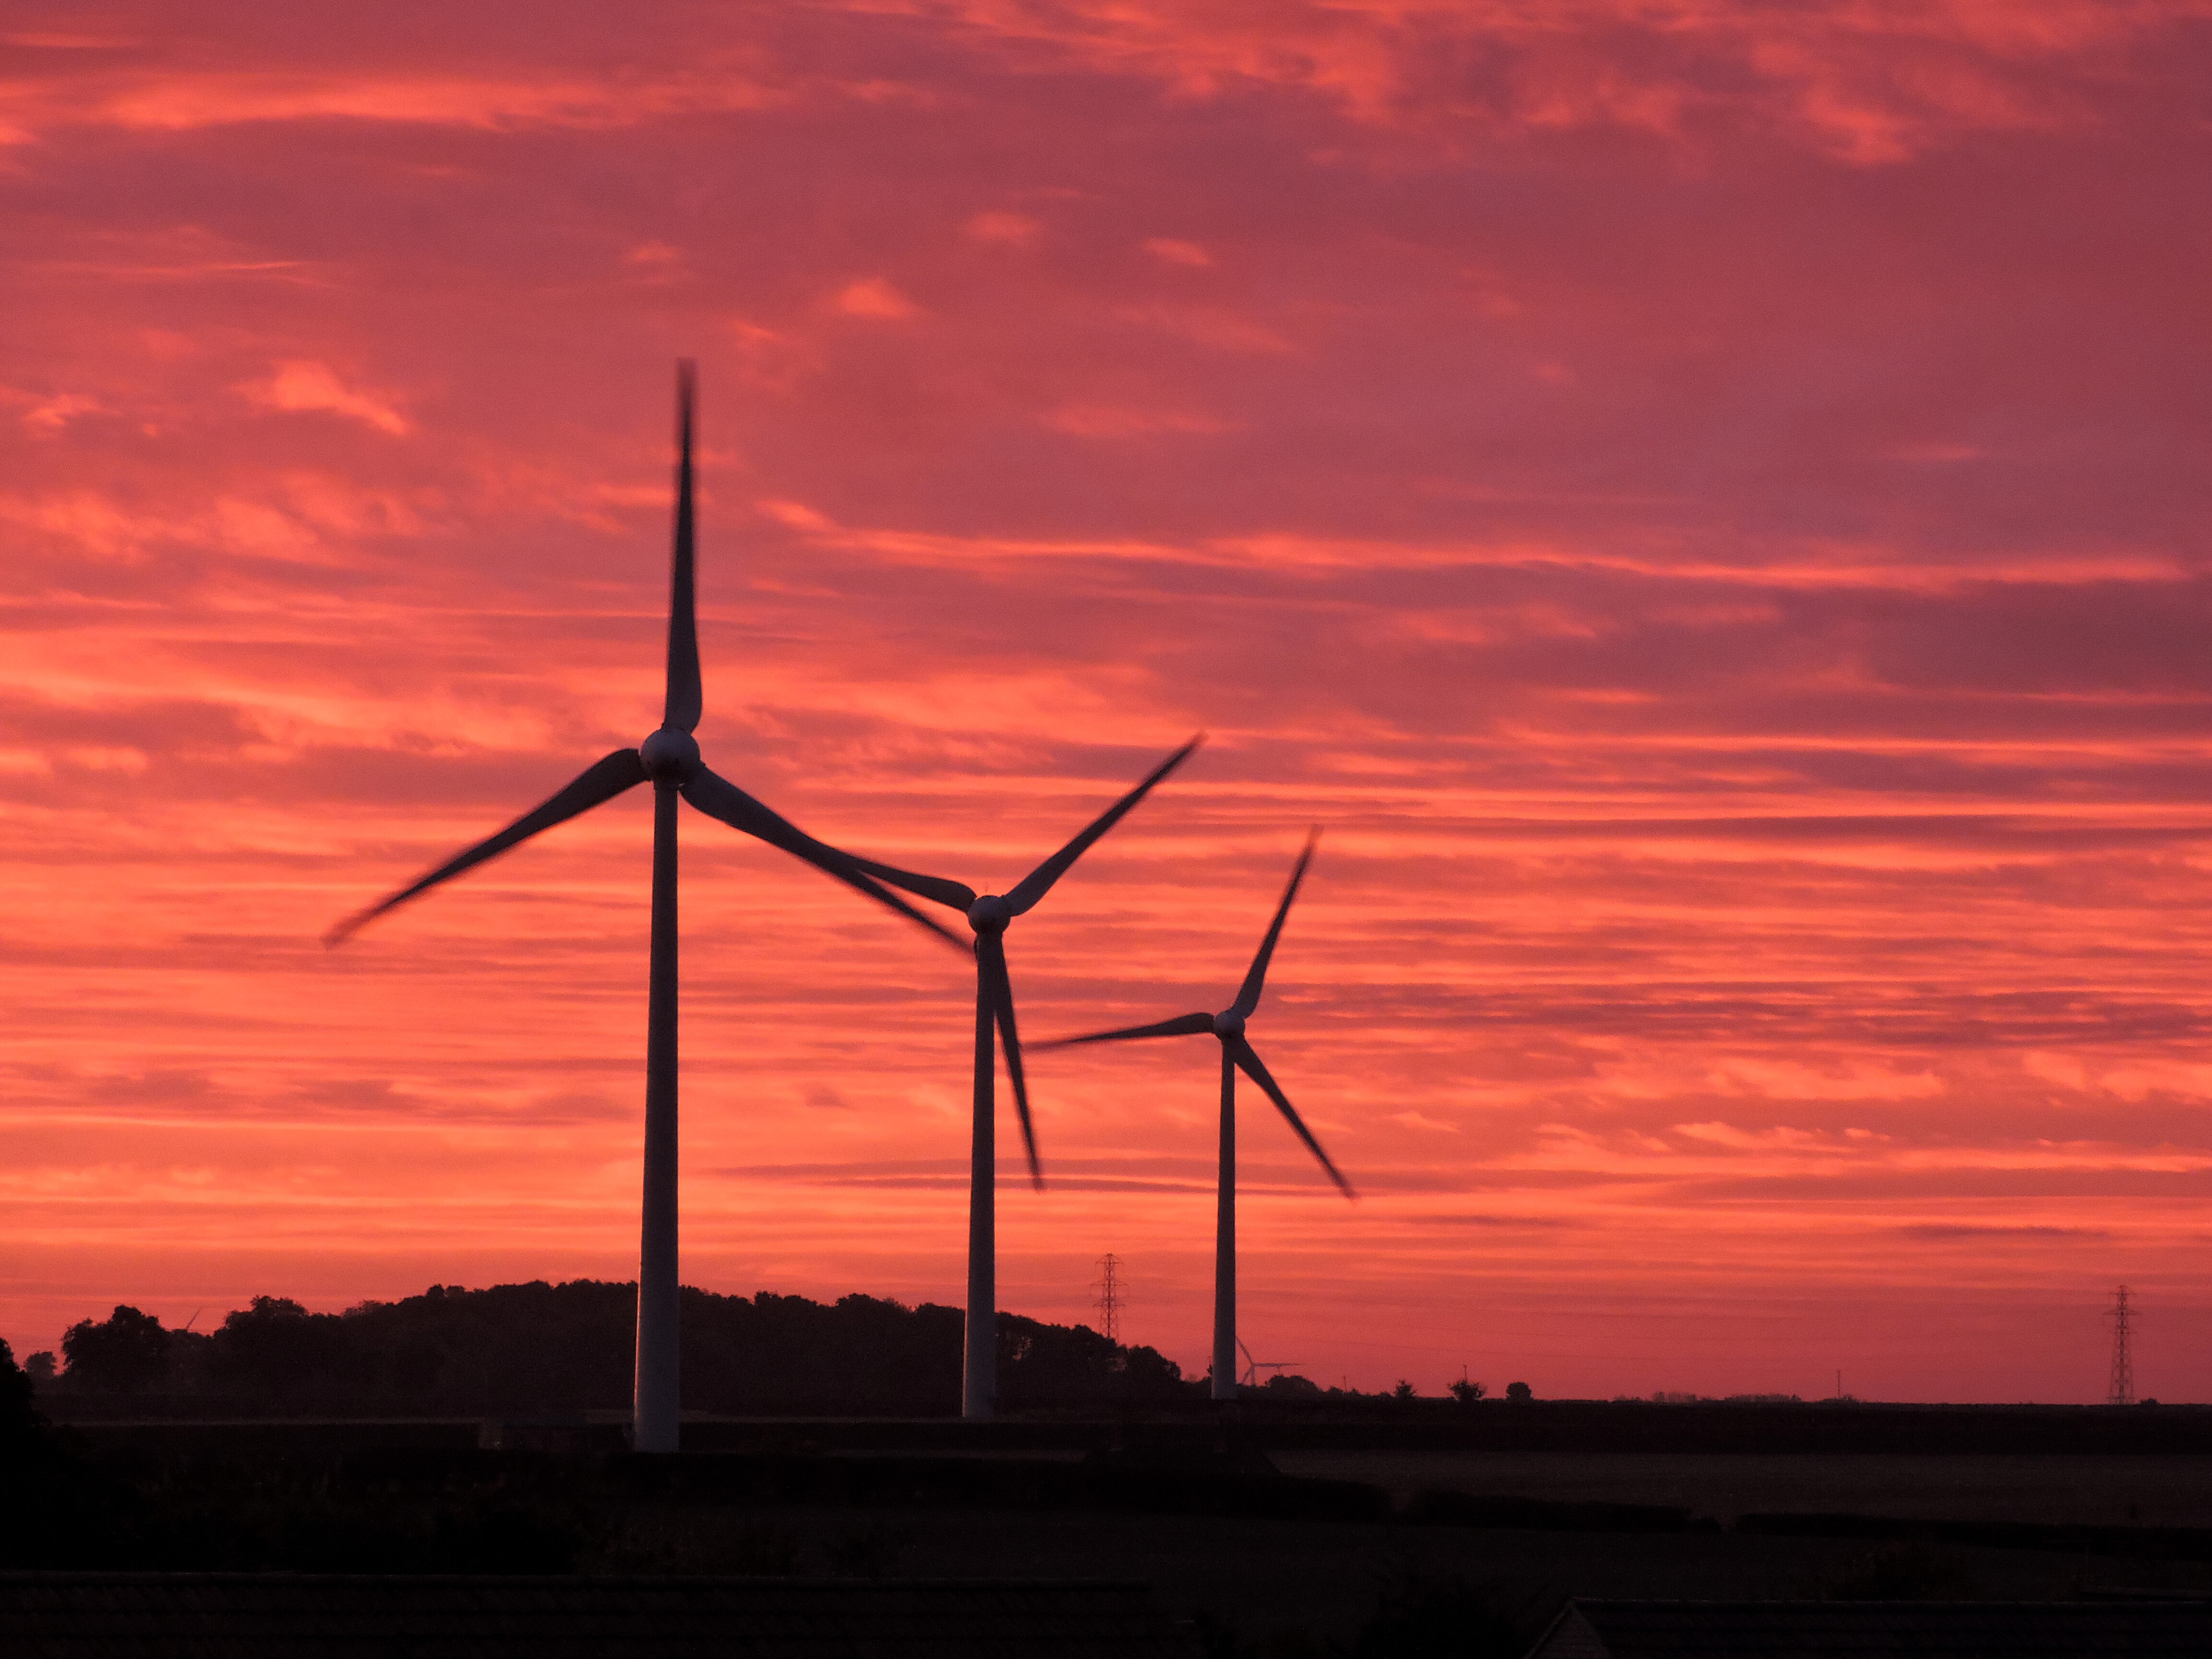 Views sought on Scottish Government Energy Strategy consultation